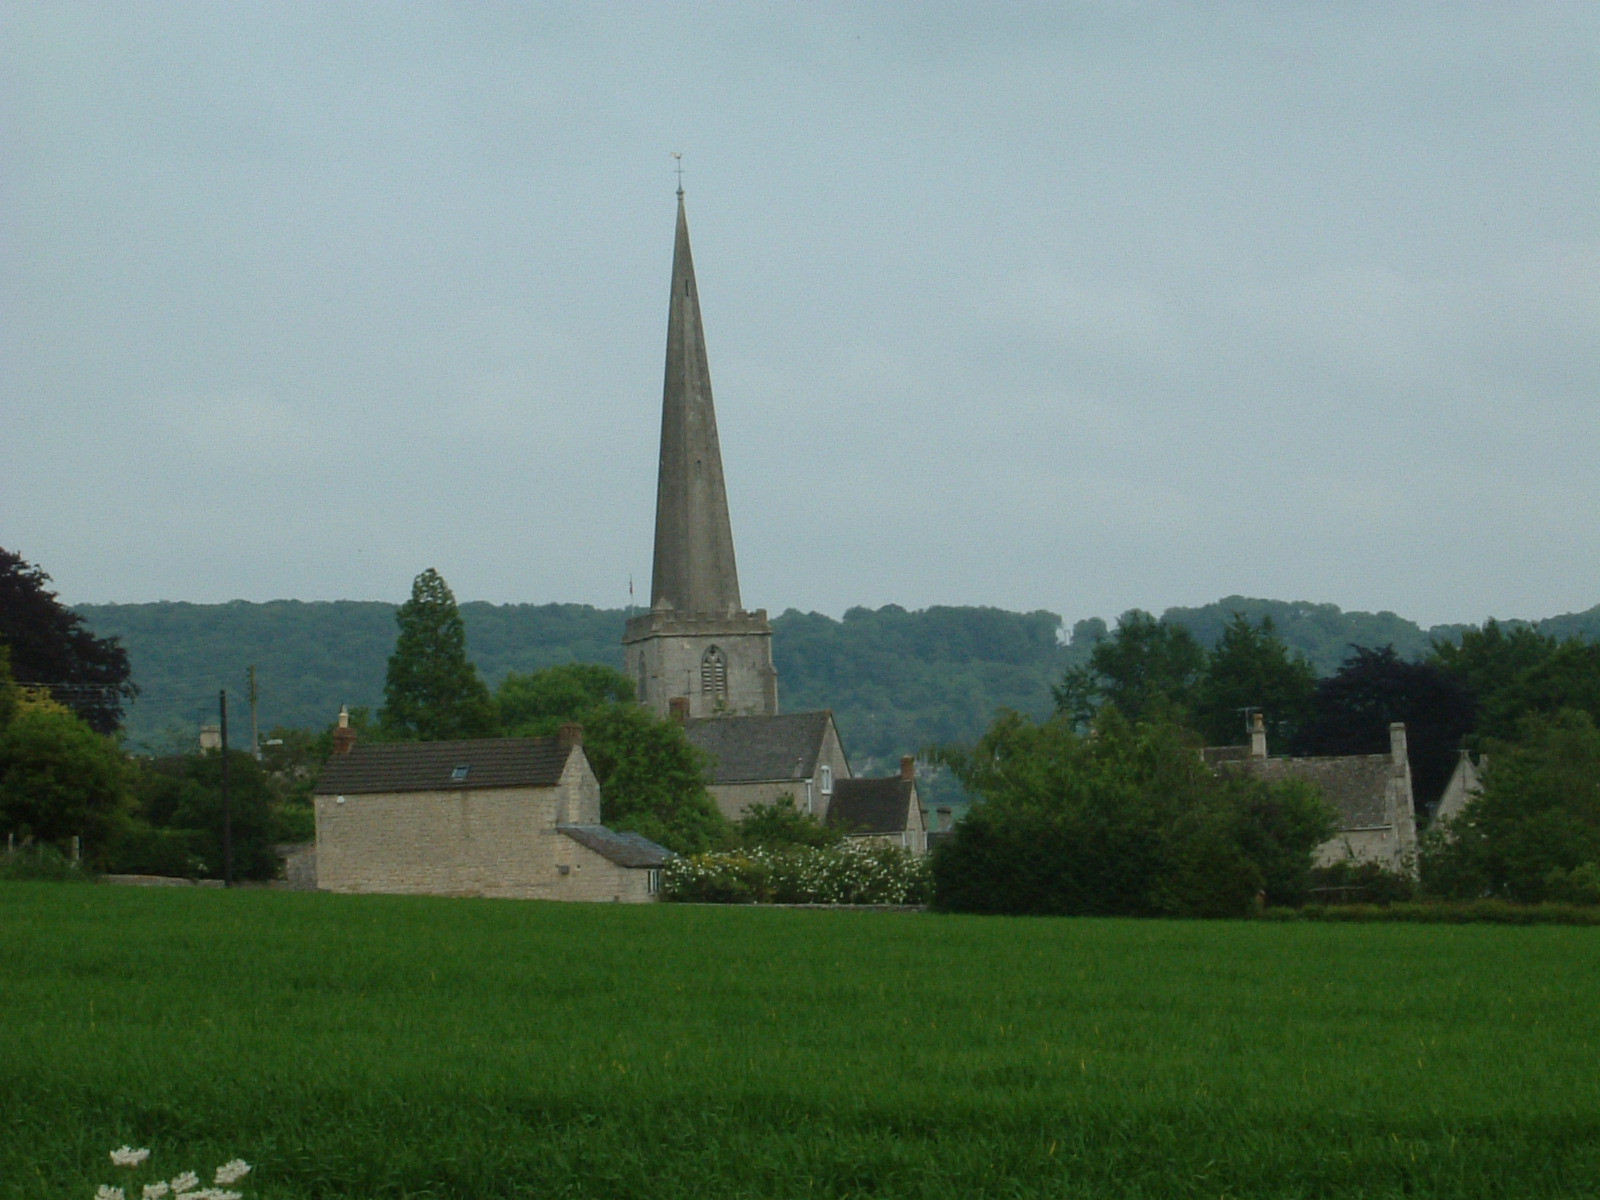 The huge spire of Painswick Church